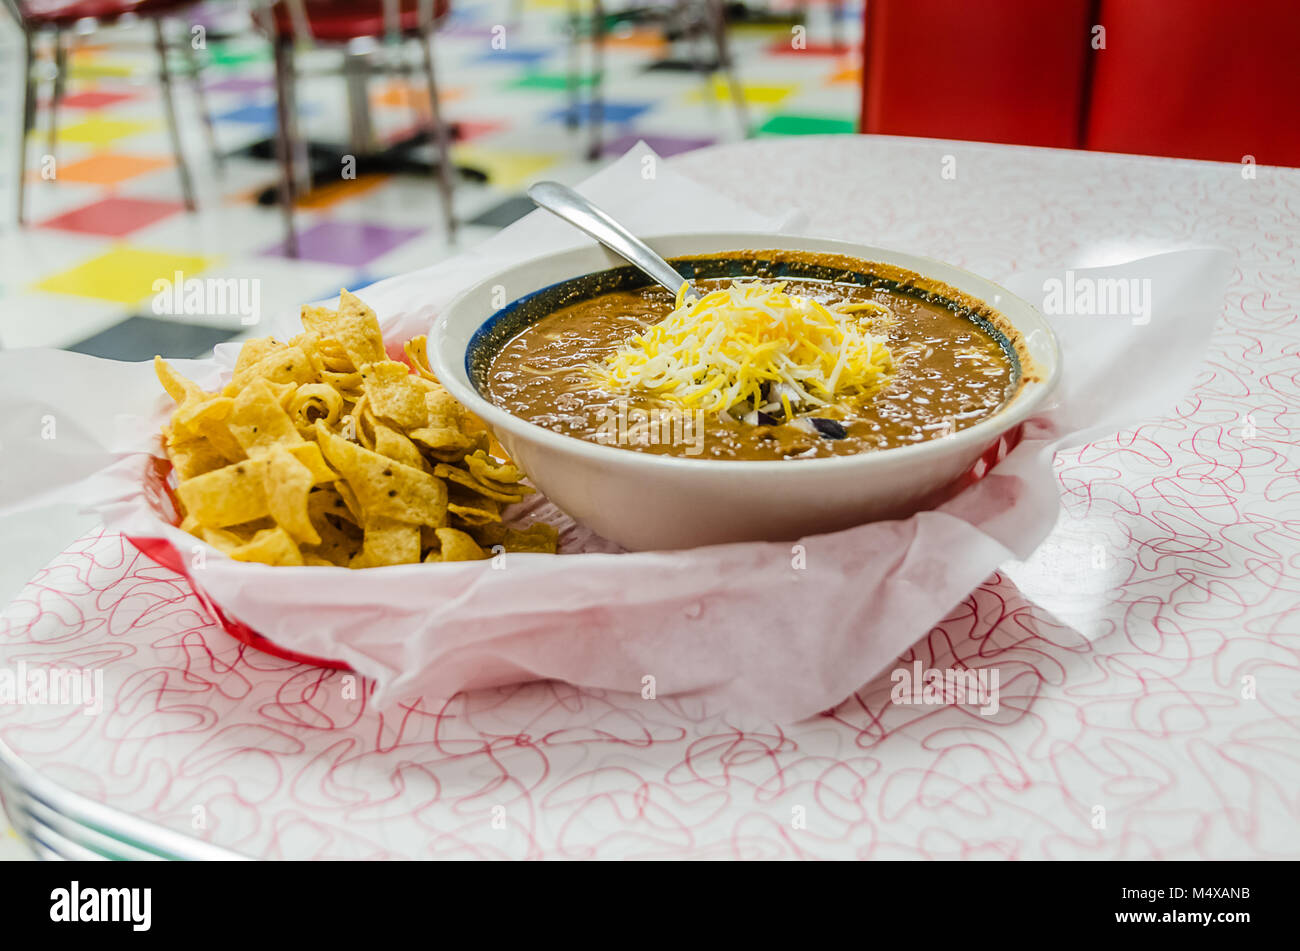 Frito Pie served at an All-American retro diner in Texas. Frito pie basic ingredients are chili, cheese, and corn chips. Stock Photo